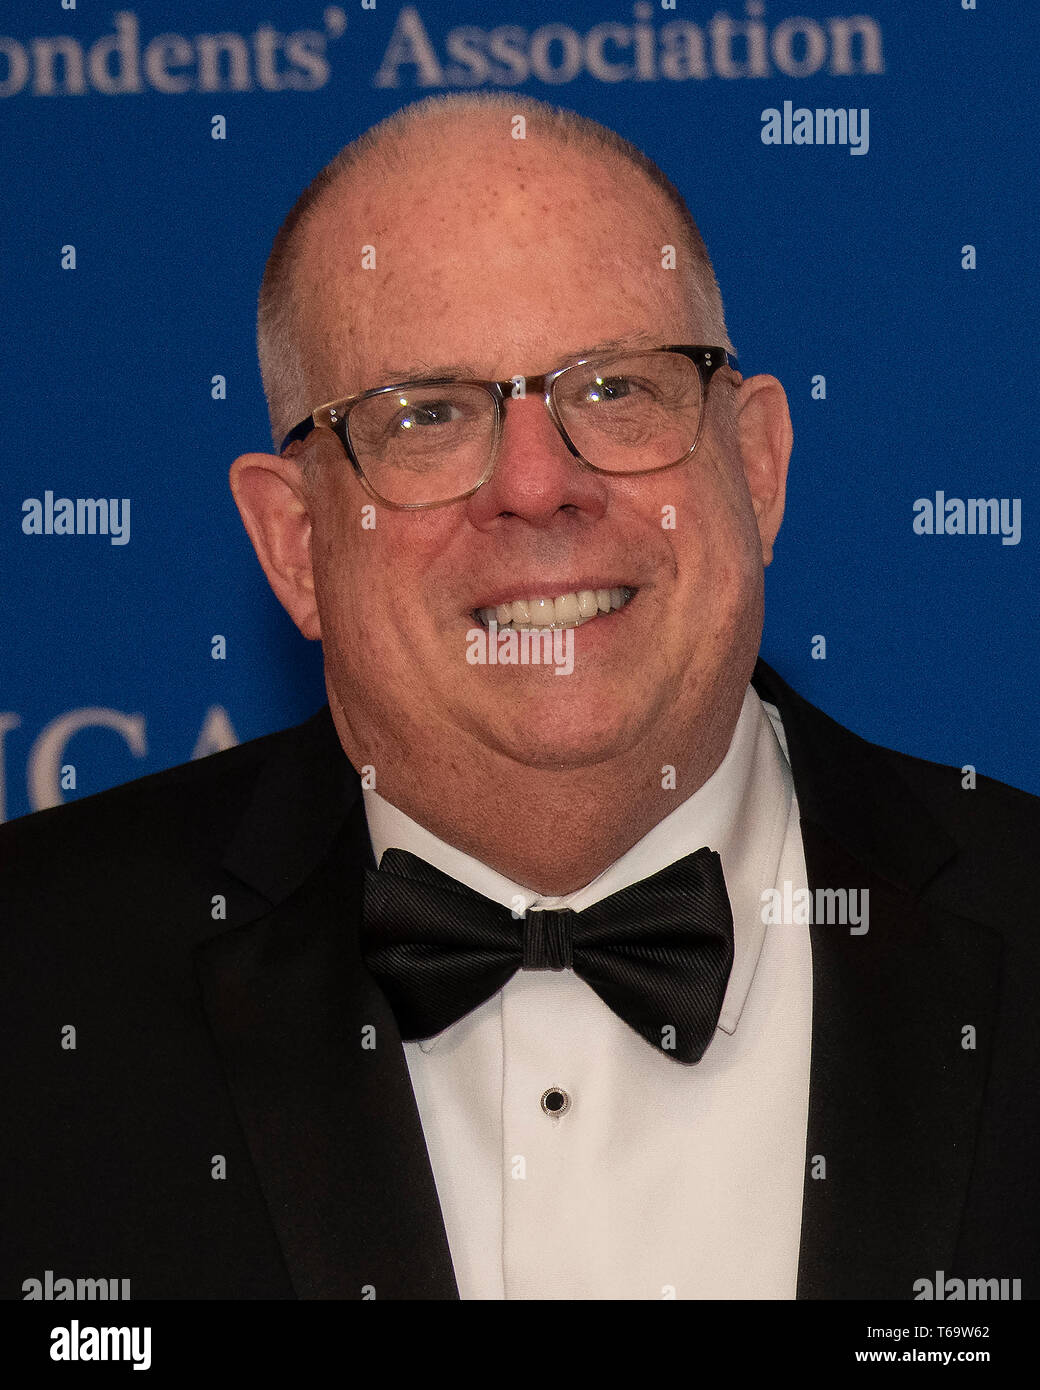 Governor Larry Hogan (Republican of Maryland) arrives for the 2019 White House Correspondents Association Annual Dinner at the Washington Hilton Hotel on Saturday, April 27, 2019. Credit: Ron Sachs/CNP (RESTRICTION: NO New York or New Jersey Newspapers or newspapers within a 75 mile radius of New York City) | usage worldwide Stock Photo